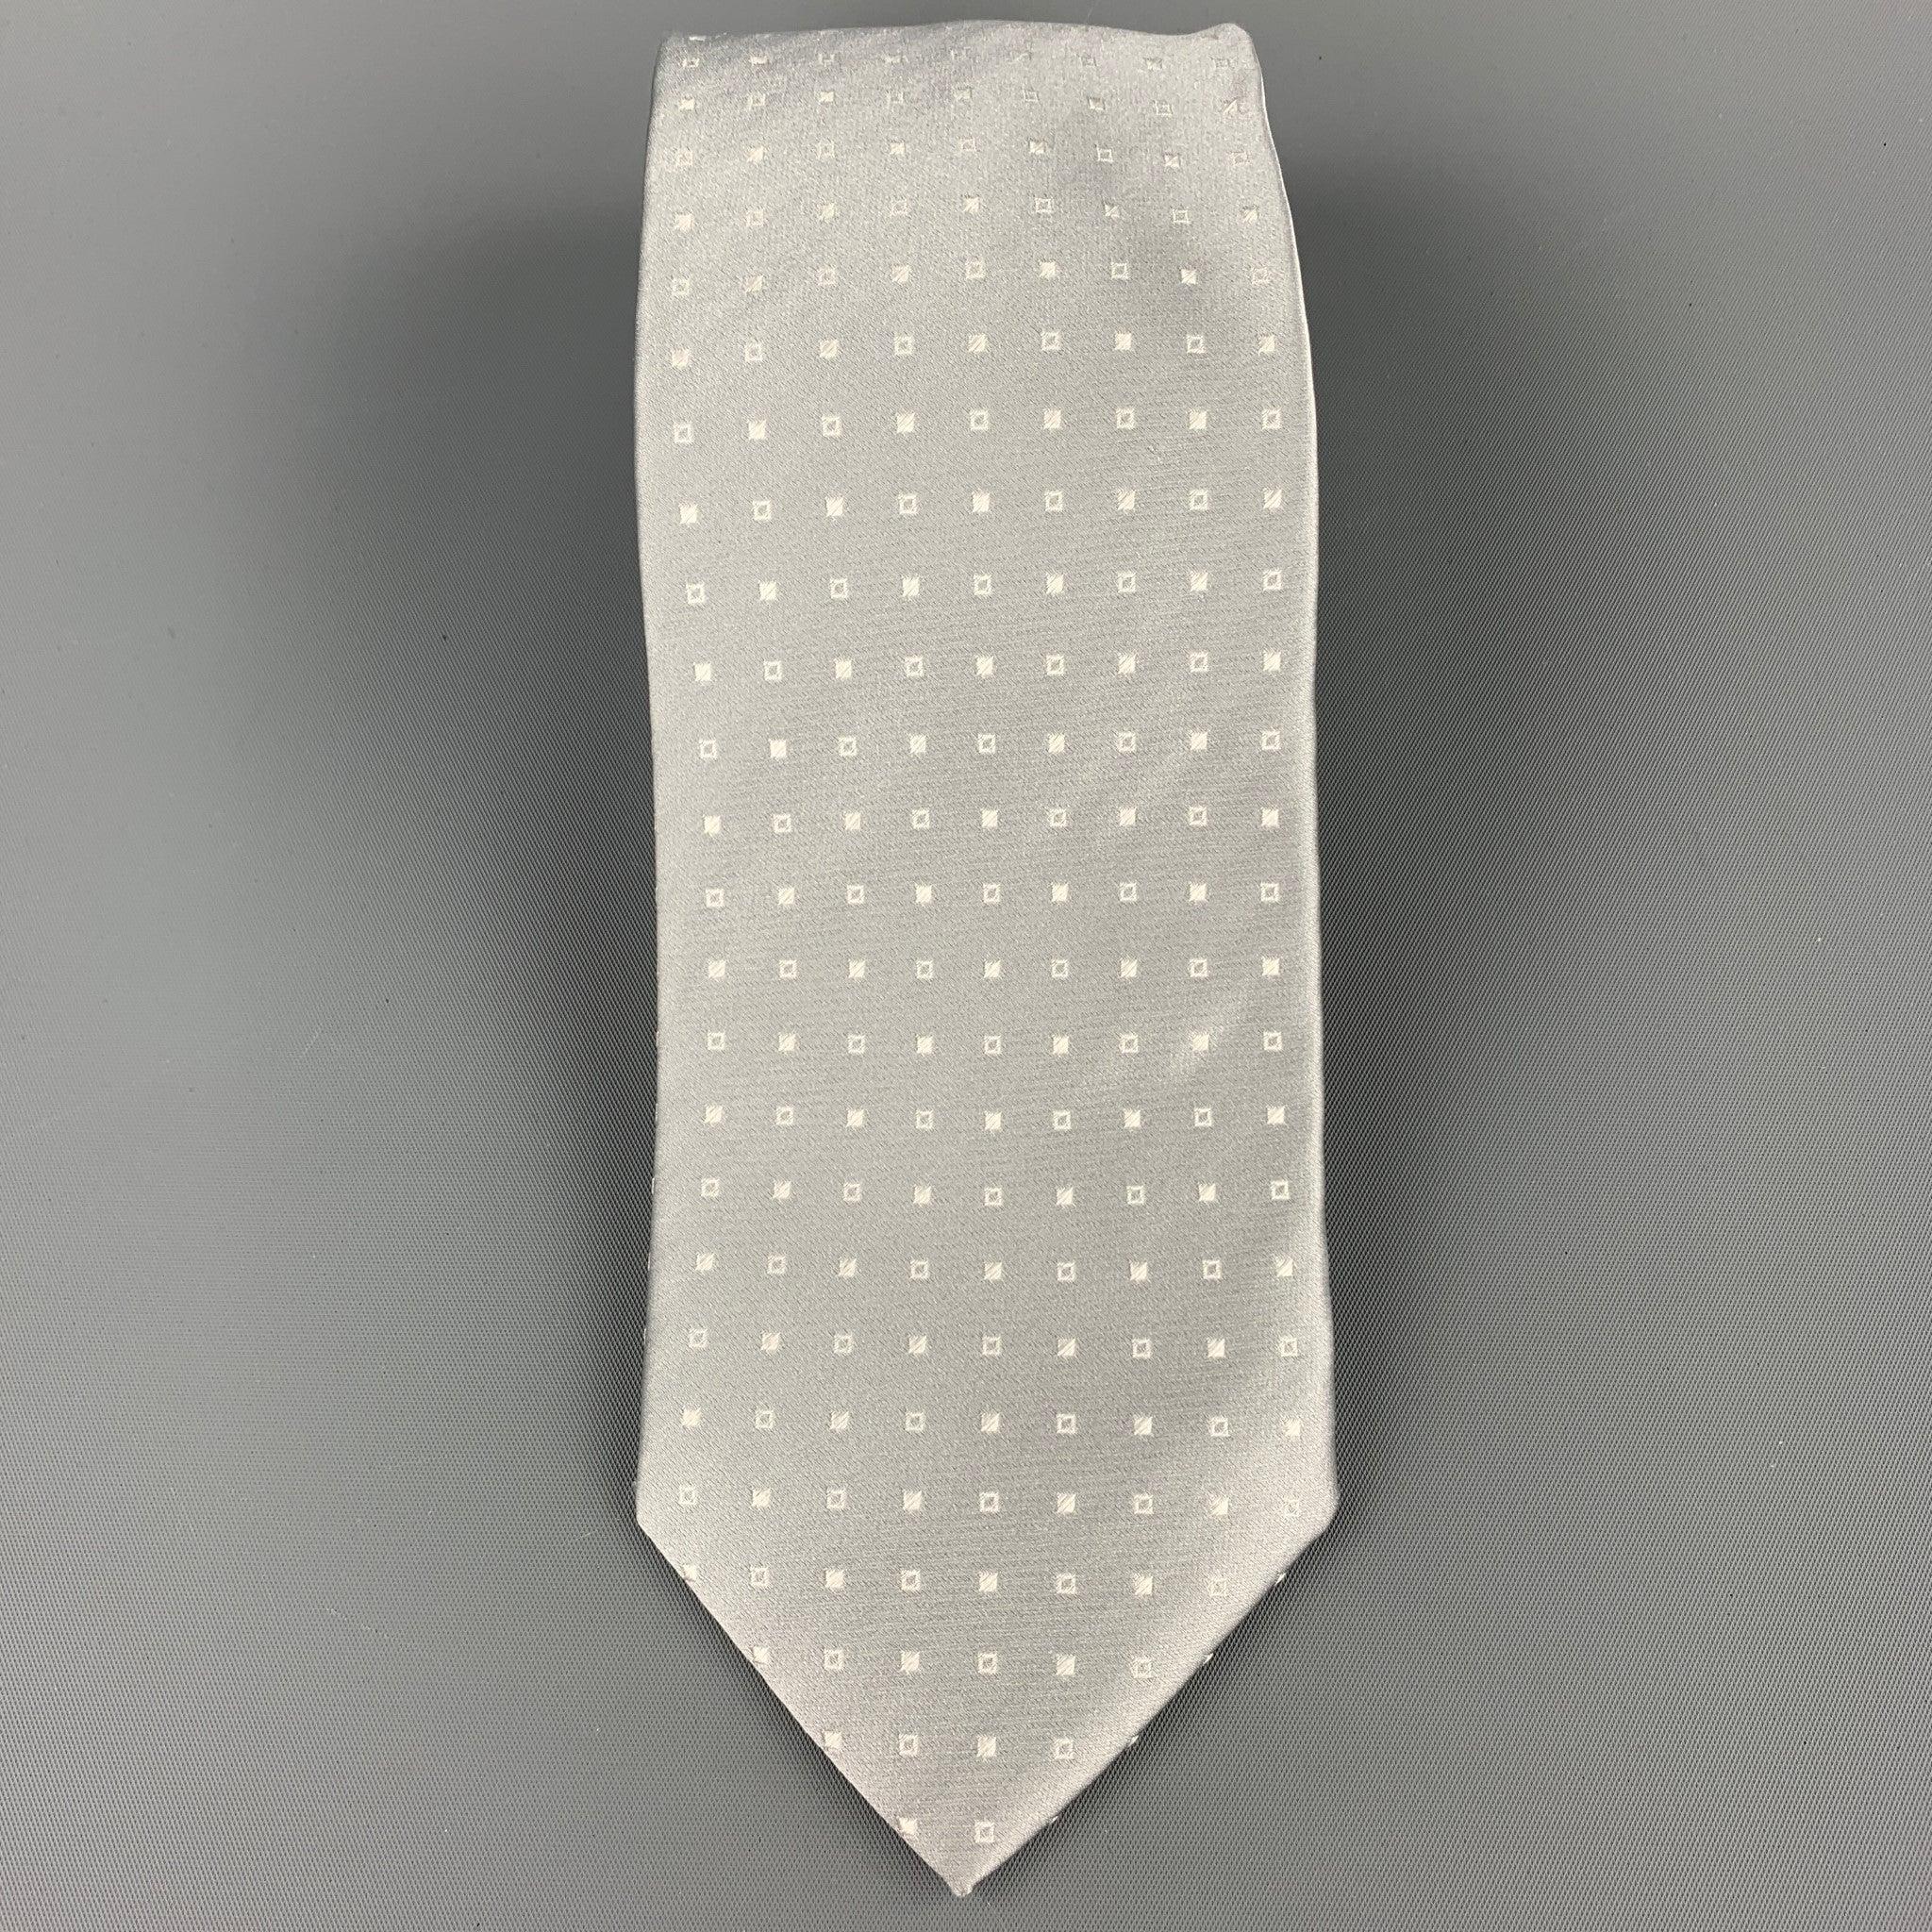 ERMENEGILDO ZEGNA tie comes in a silver square print silk. Made in Italy.Very Good Pre-Owned Condition.Width: 4 inches  
  
  
  
 Sui Generis Reference: 107884
 Category: Tie
 More Details
  
 Brand: ERMENEGILDO ZEGNA
 Color: Silver
 Pattern: